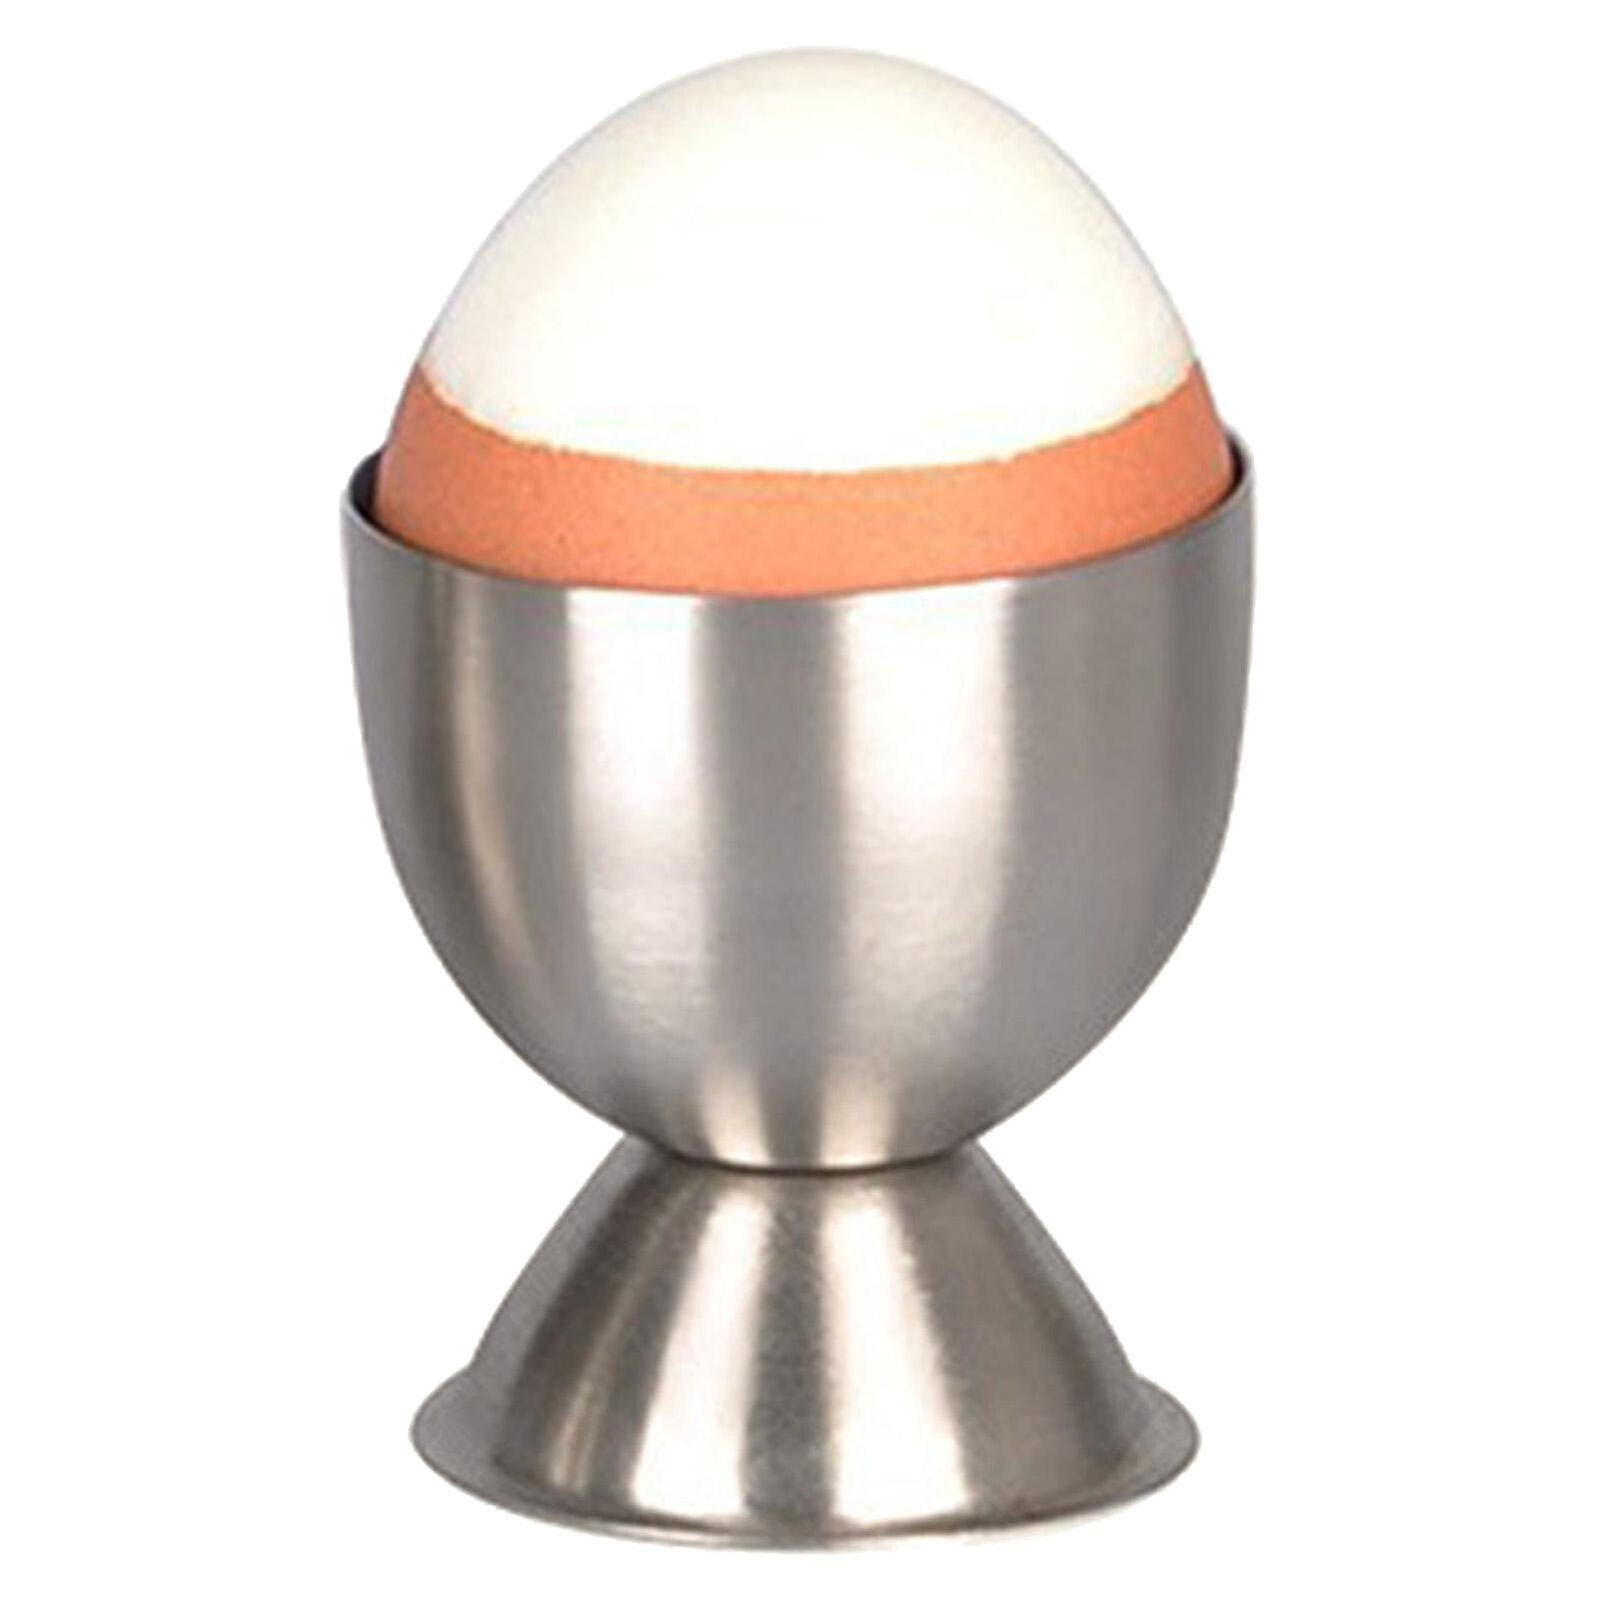 1PCS NEW Stainless Steel Egg Cups For Soft Boiled Eggs Kitchen Tools US